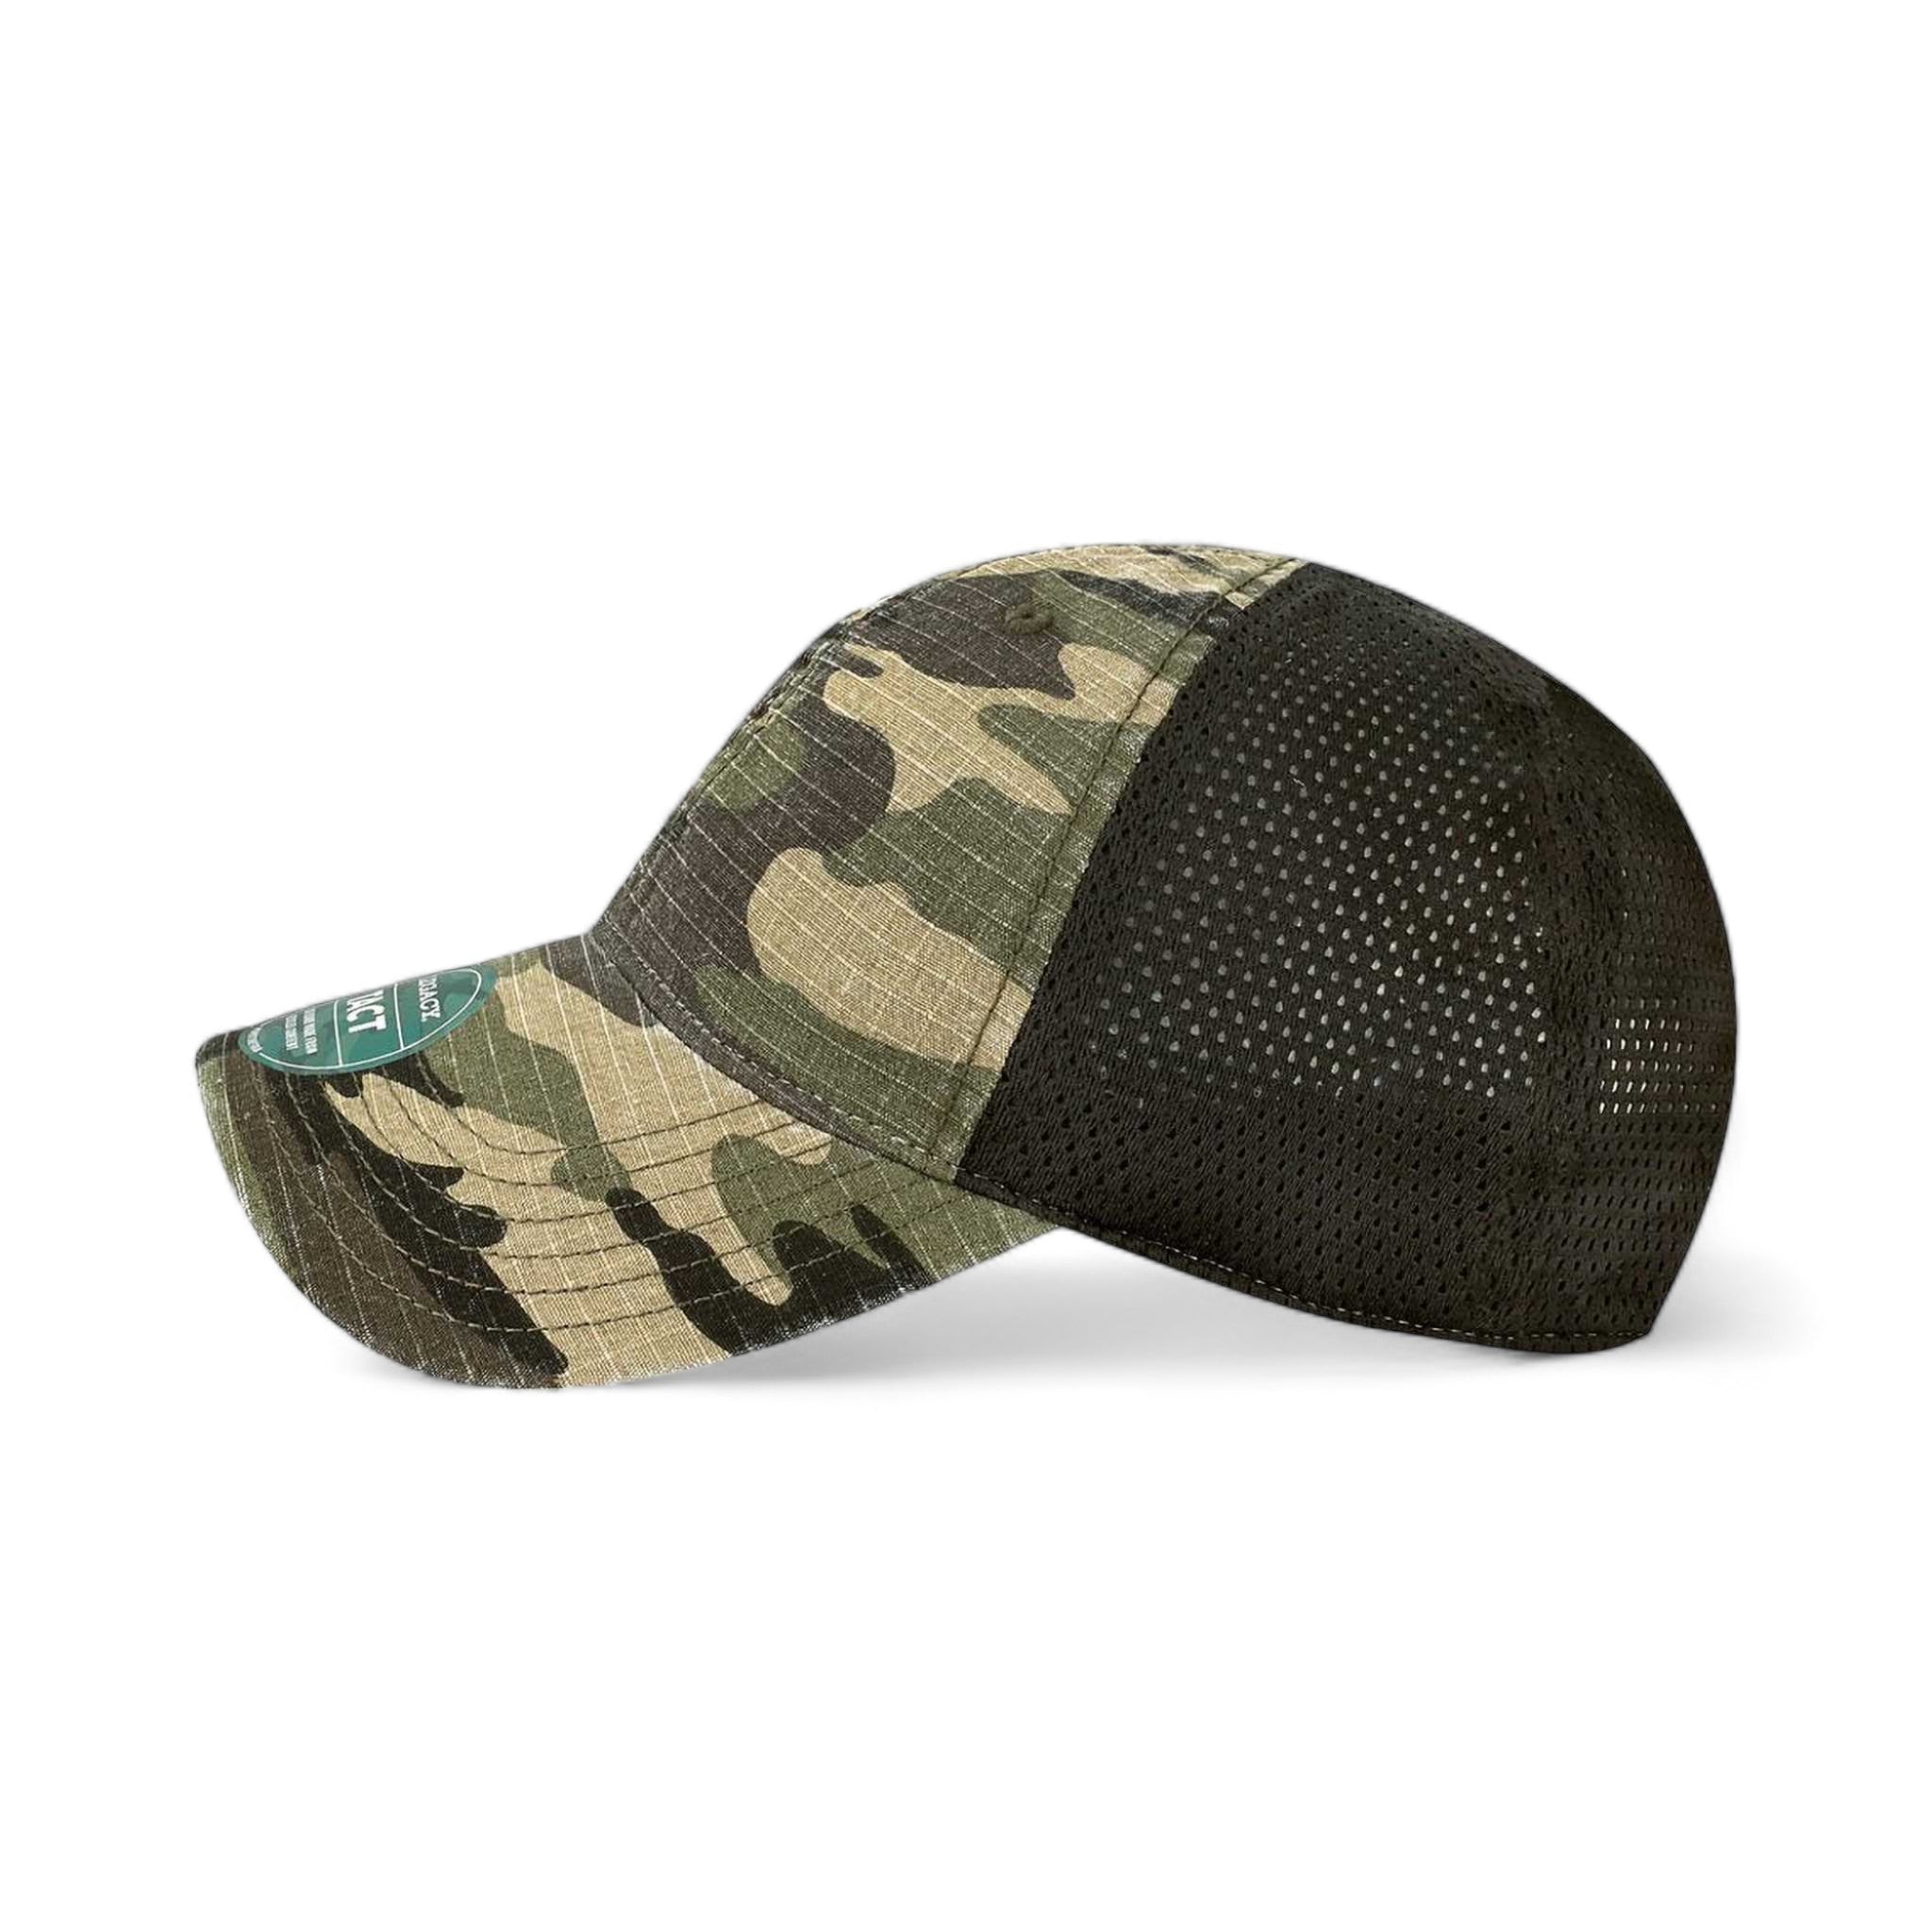 Side view of LEGACY TACT custom hat in army camo and black